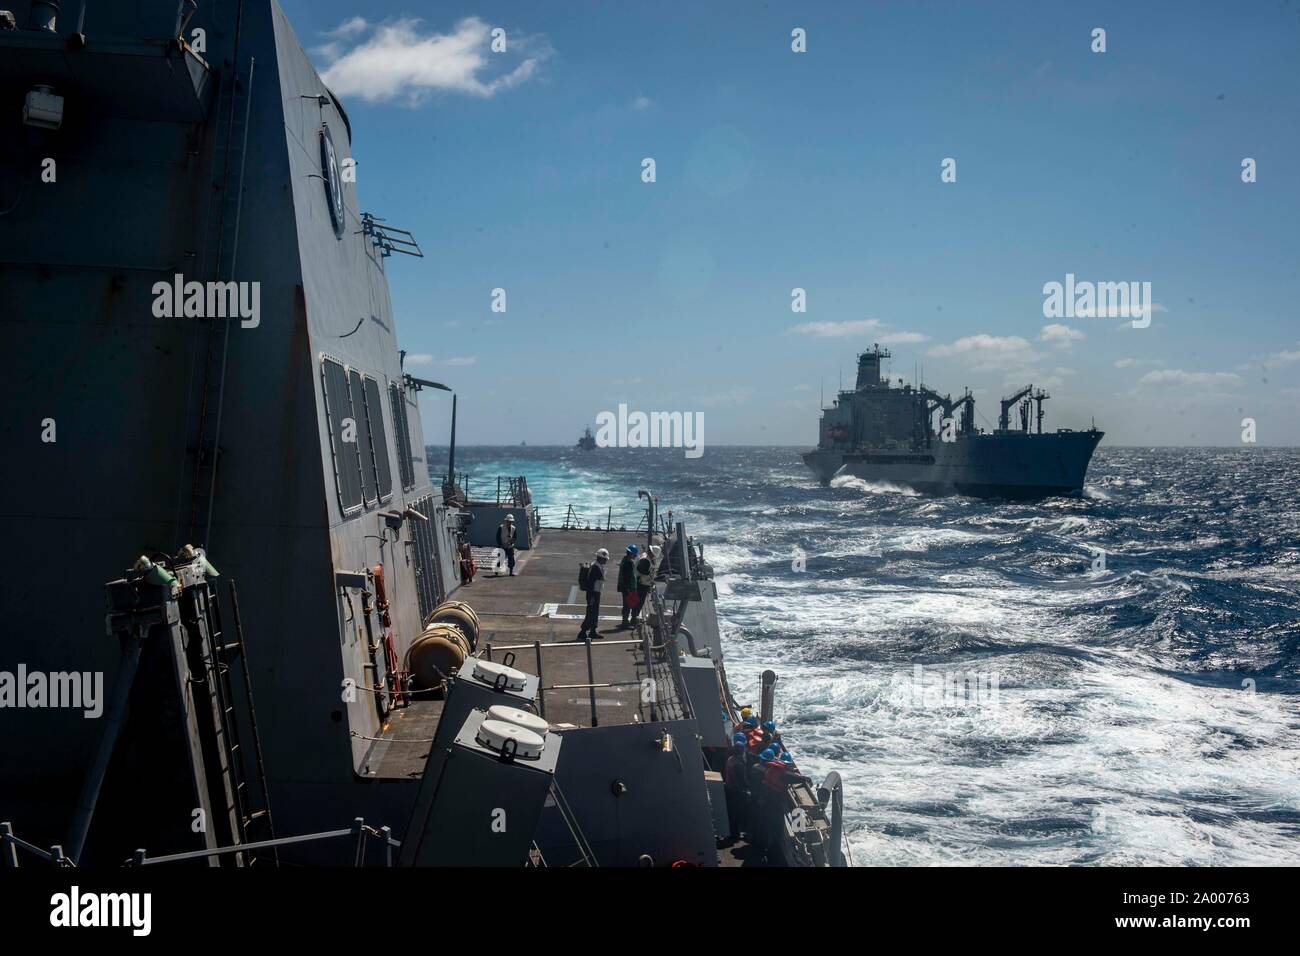 190918-N-MW694-0386 EAST CHINA SEA (Sept. 18, 2019) The Arleigh Burke-class guided-missile destroyer USS William P. Lawrence (DDG 110) breaks away from the fleet replenishment oiler USNS Pecos (T- AO 197) after an underway replenishment. William P. Lawrence is underway conducting routine operations in the Indo-Pacific region while assigned to Destroyer Squadron (DESRON) 15, the Navy's largest forward deployed DESRON and the U.S. Seventh Fleet's principal surface force. (U.S. Navy photo by Mass Communication Specialist 3rd Class Caledon Rabbipal/Released) Stock Photo